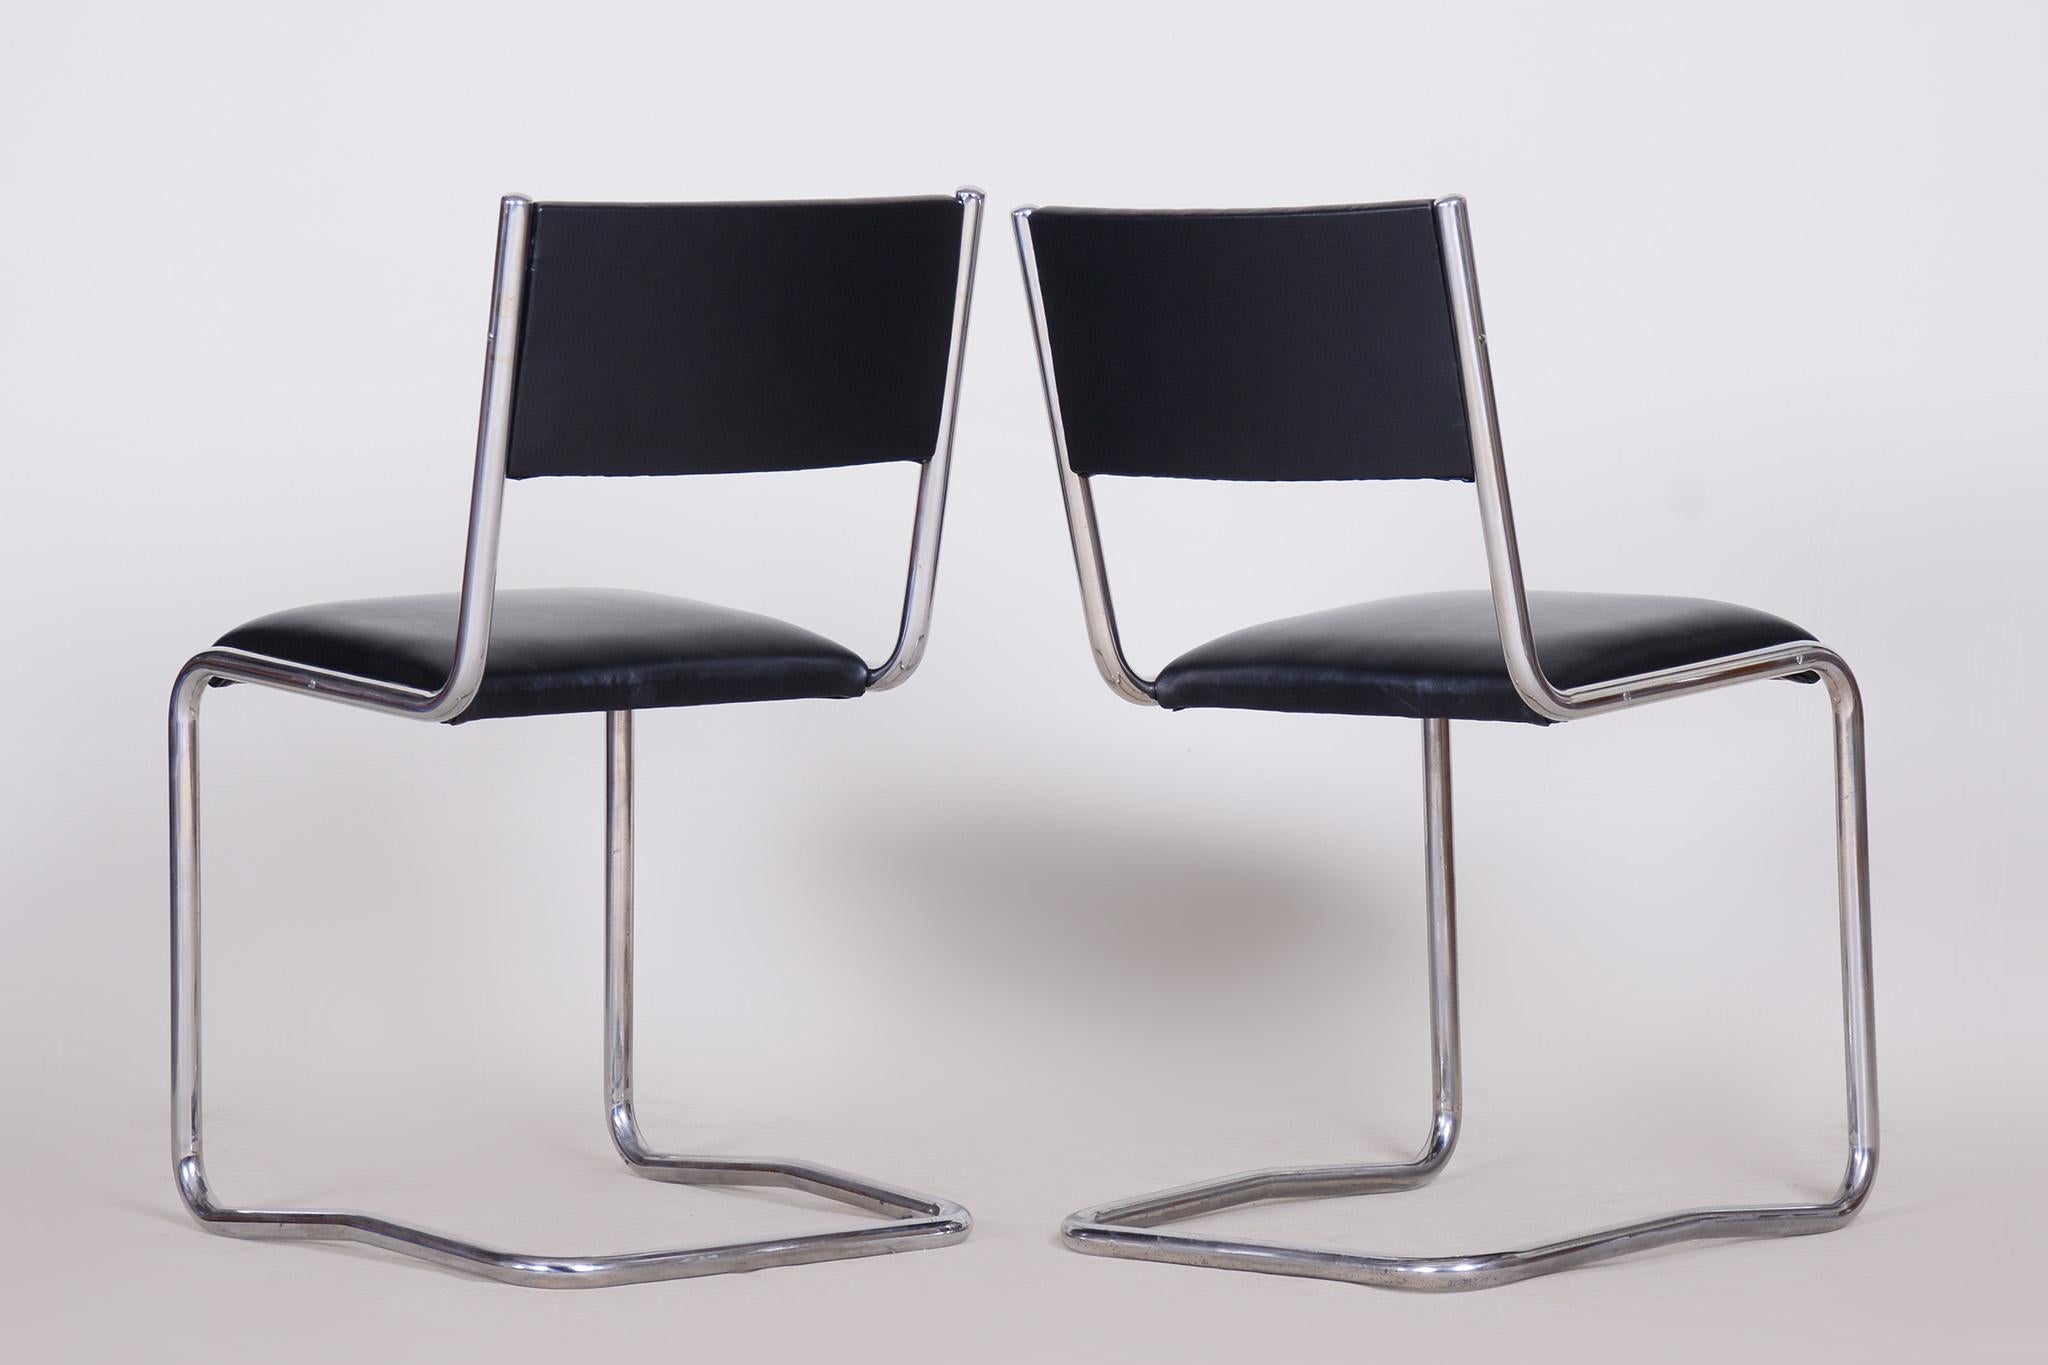 Black Leather Bauhaus Chairs, 1930s Czechia For Sale 8